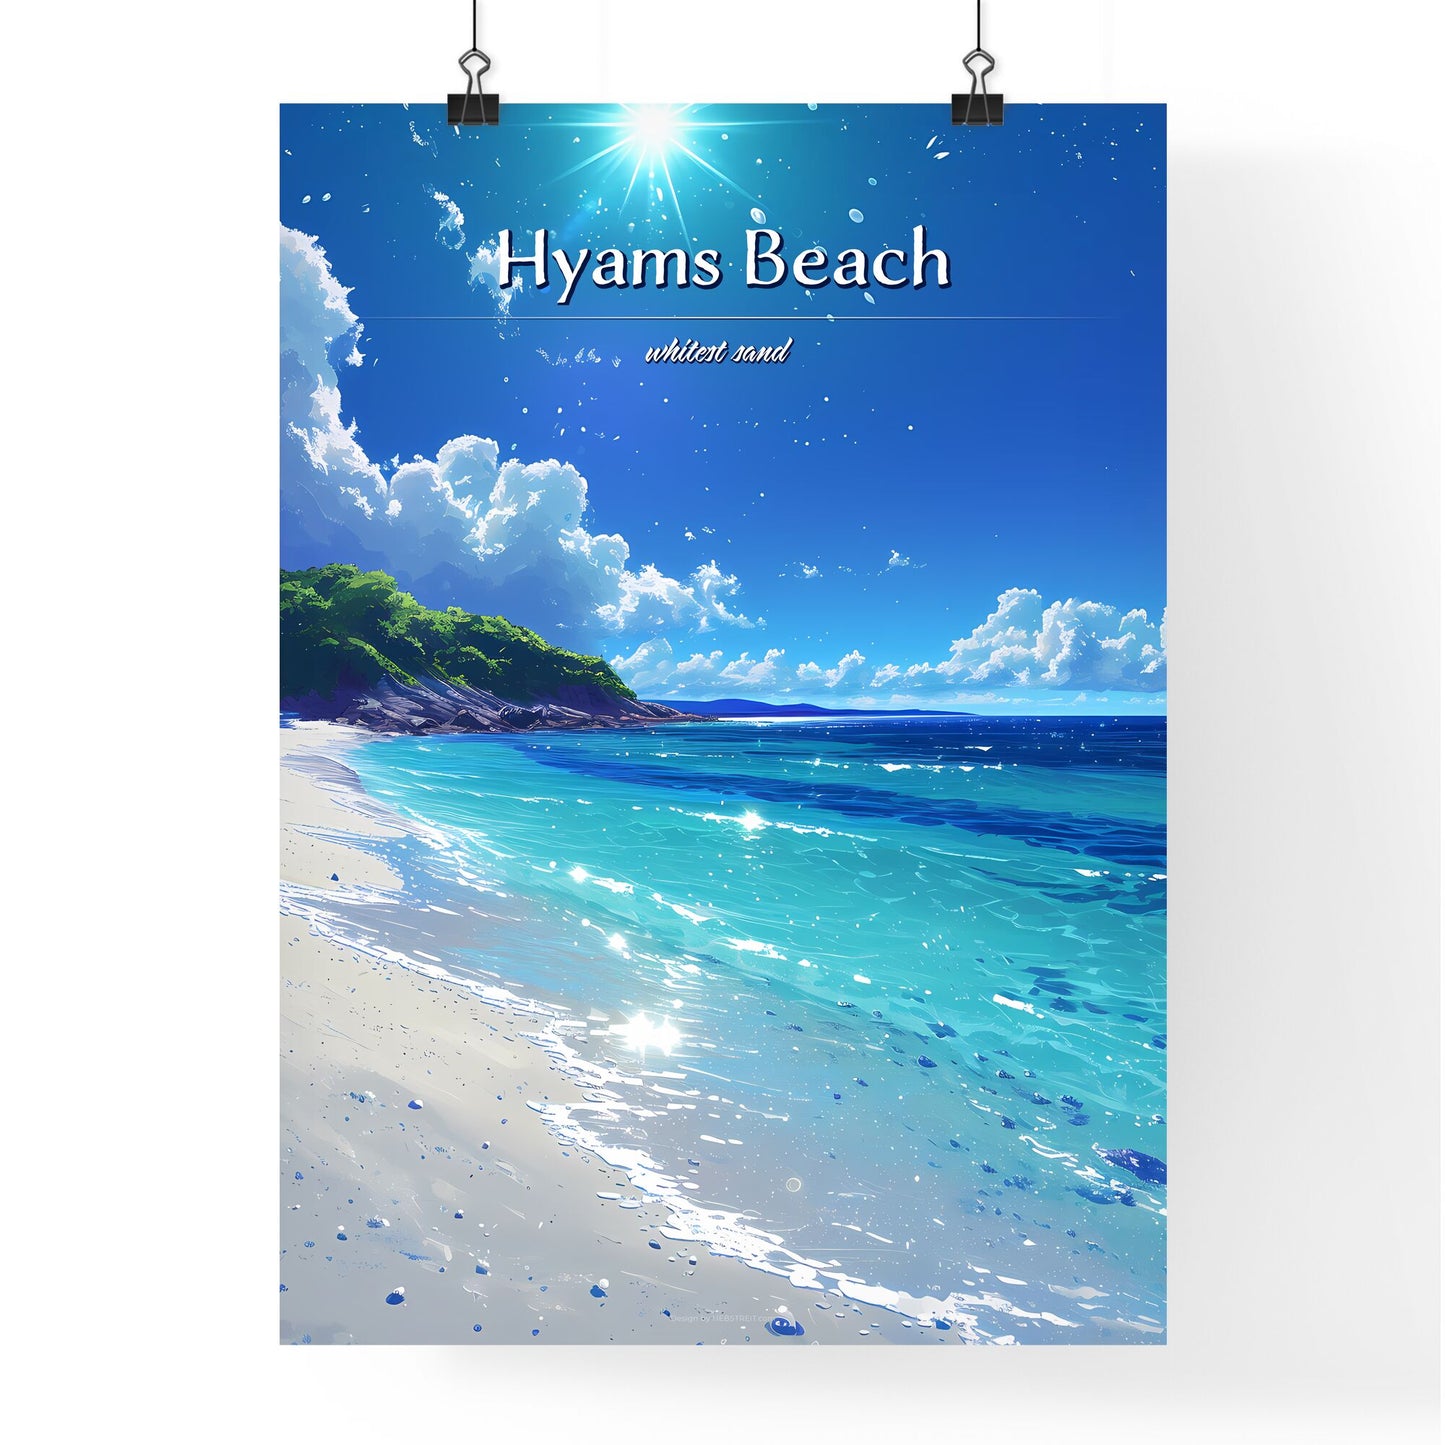 Hyams Beach - Art print of a beach with blue water and trees Default Title